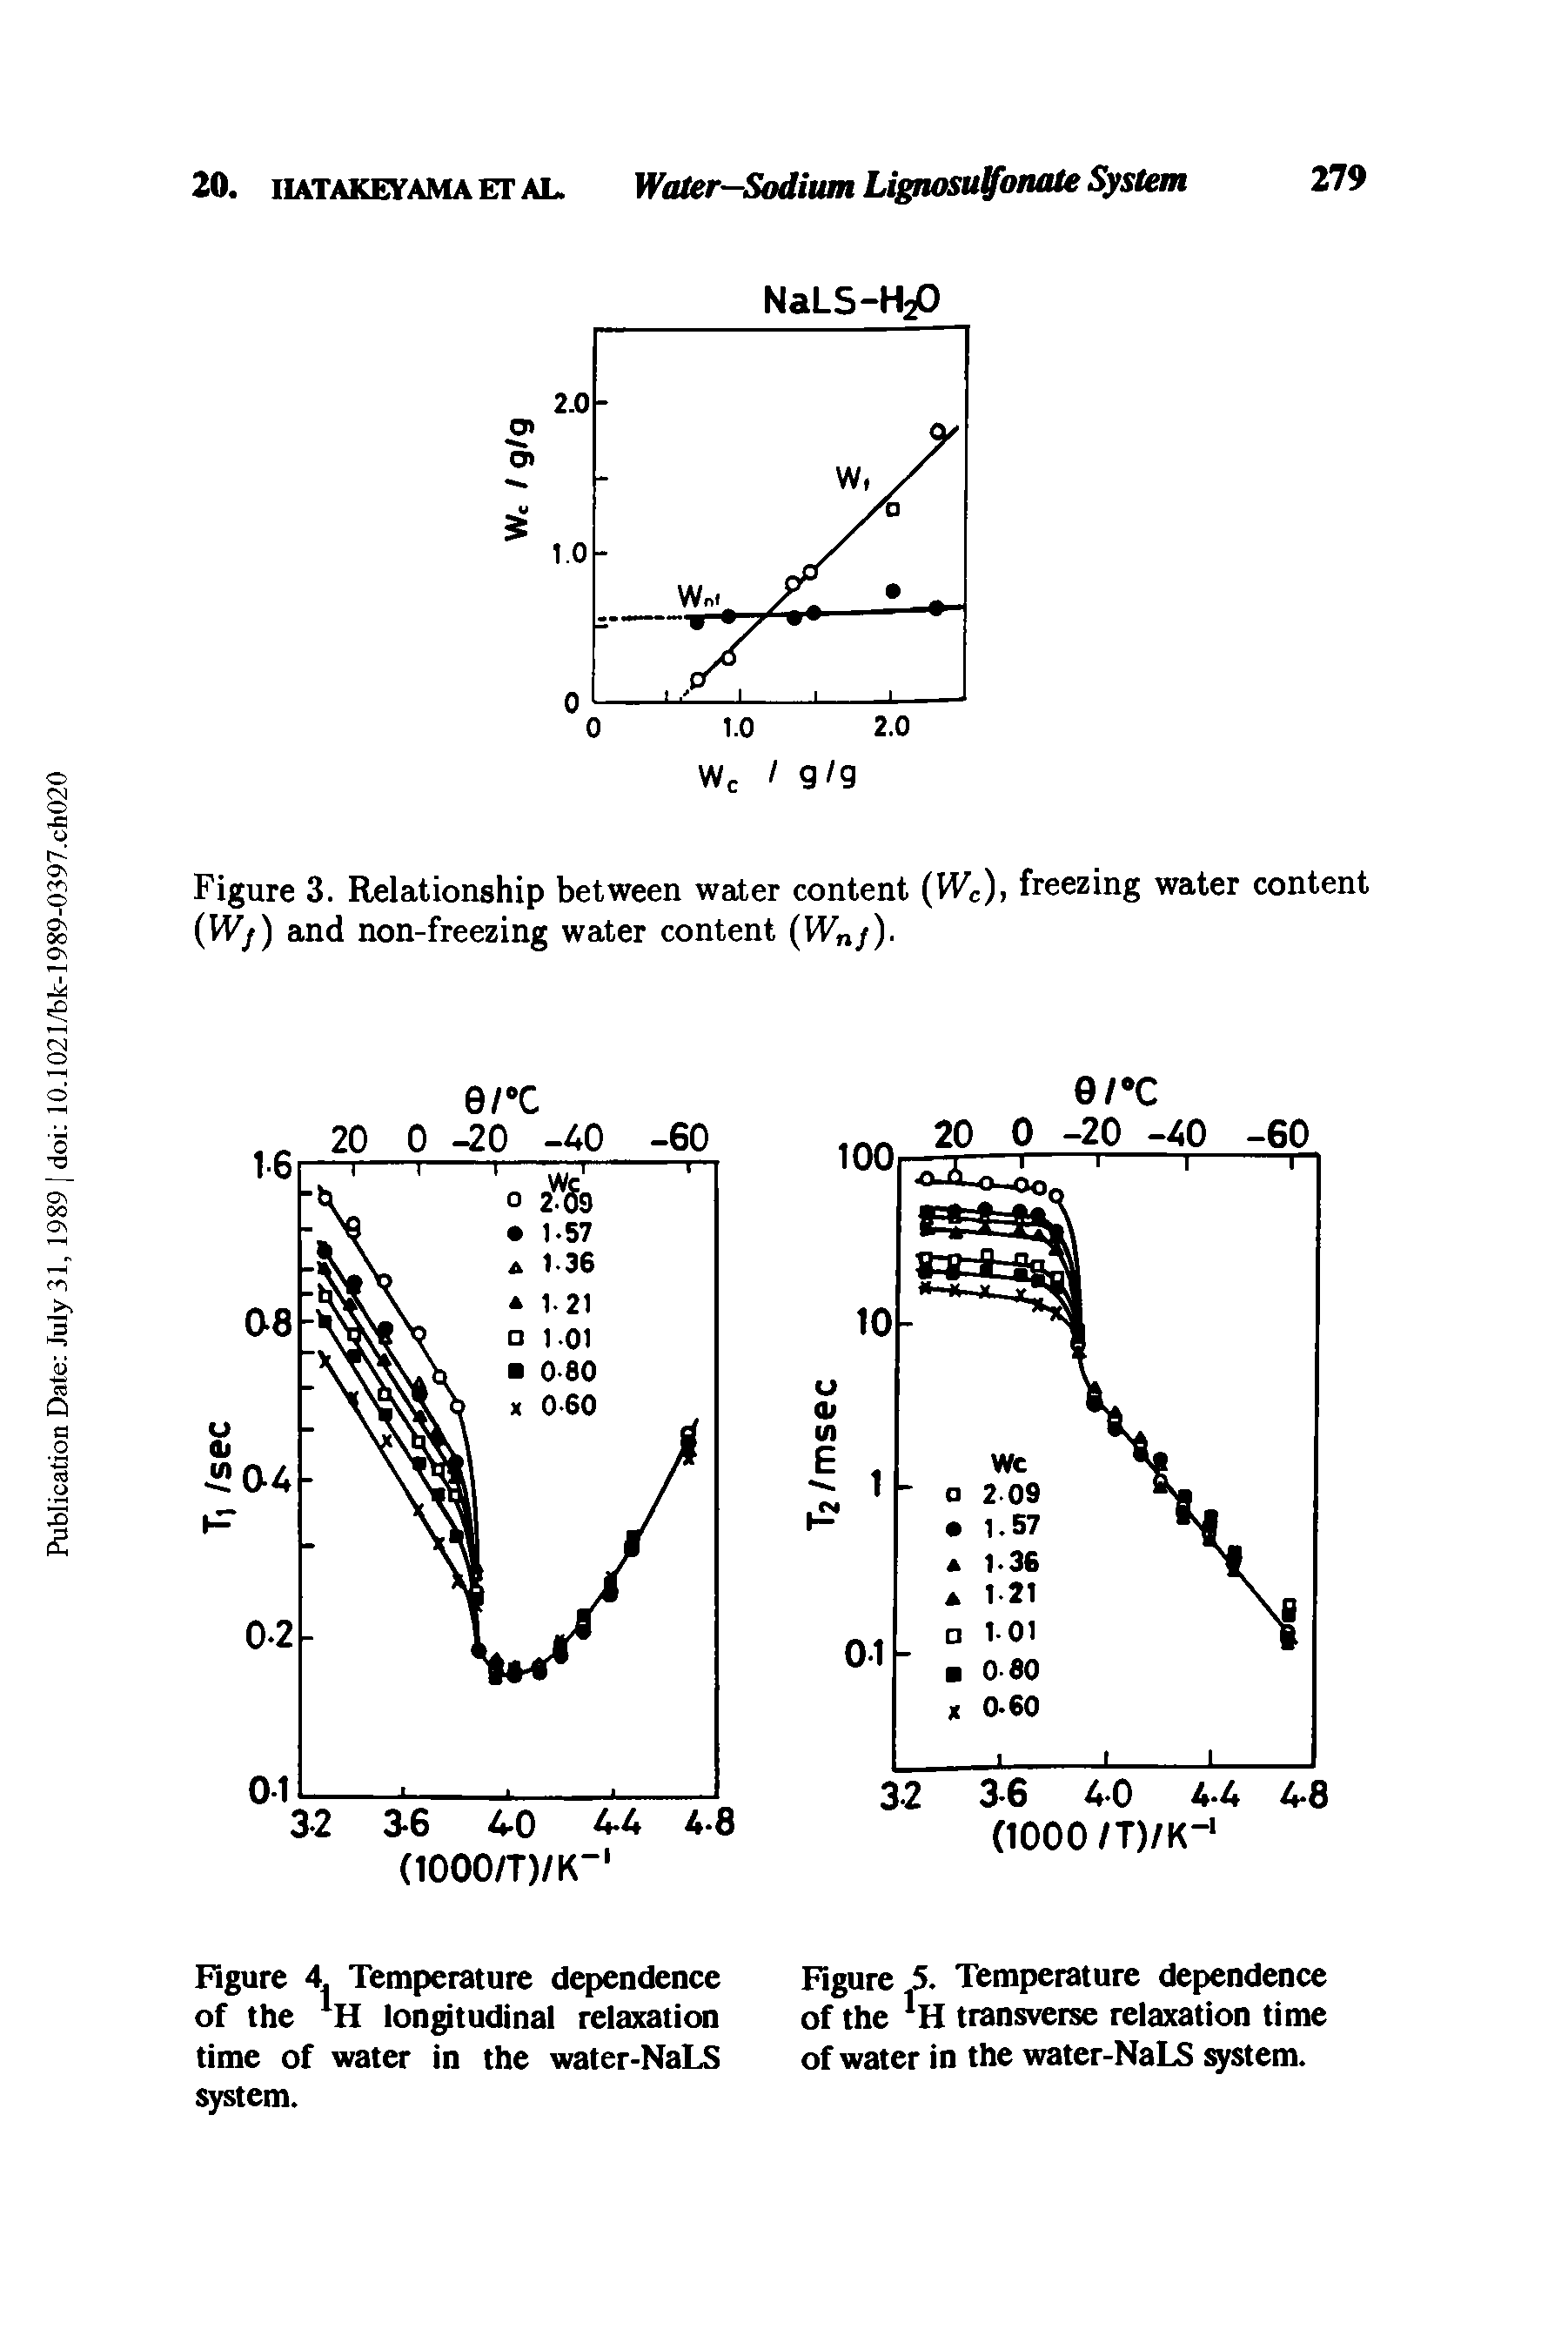 Figure 4. Temperature dependence of the longitudinal relaxation time of water in the water-NaLS system.